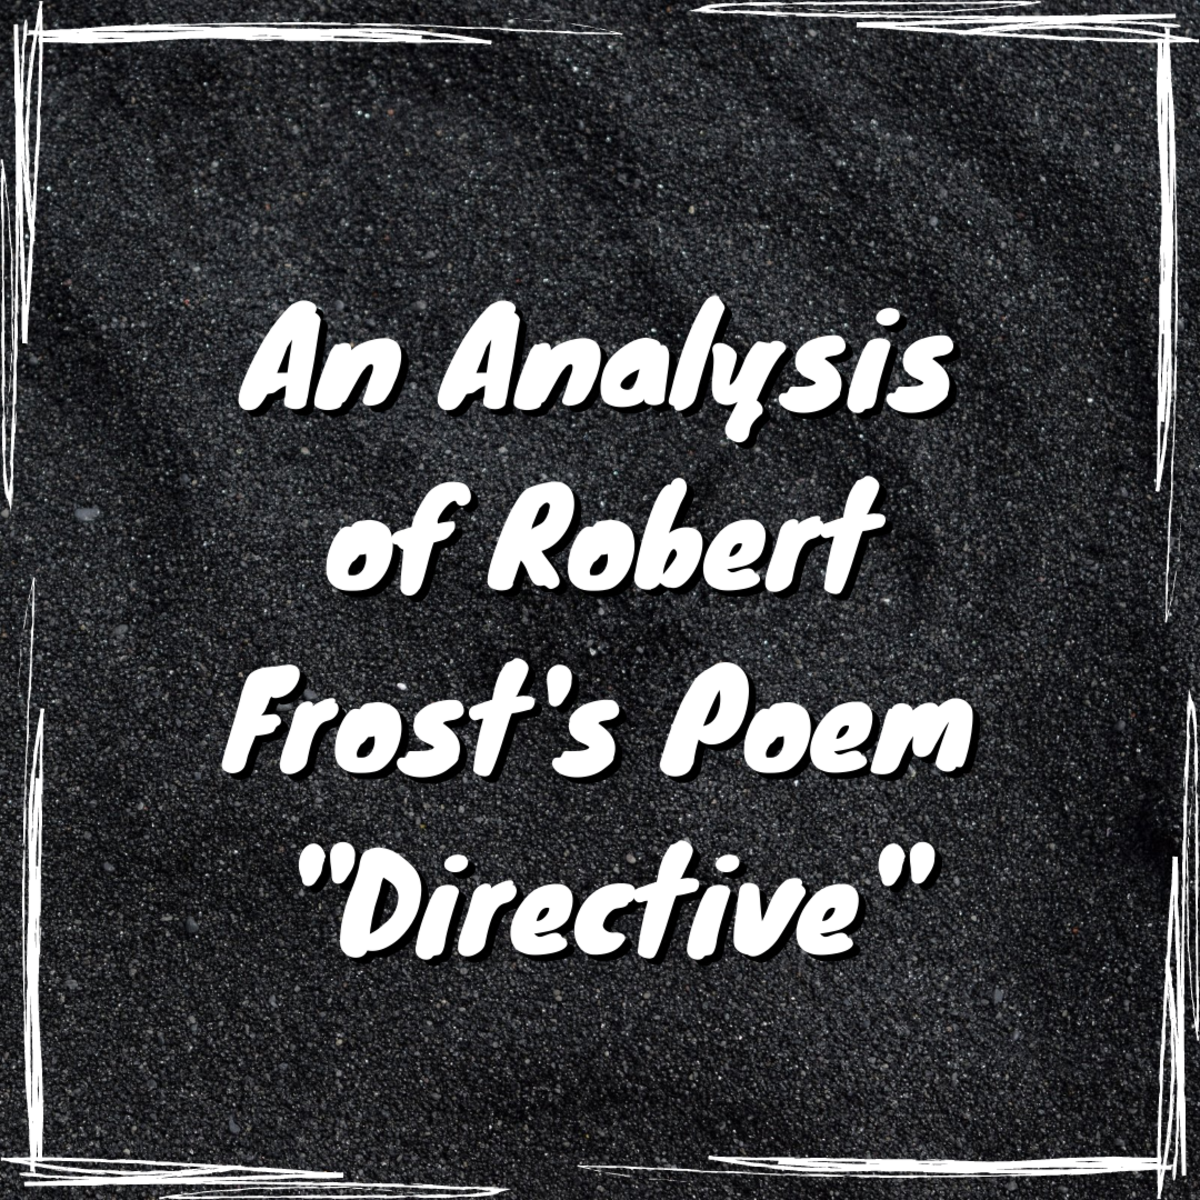 This article walks you through Robert Frost's poem "Directive," covering its use of metaphors, meter, symbols, and more.